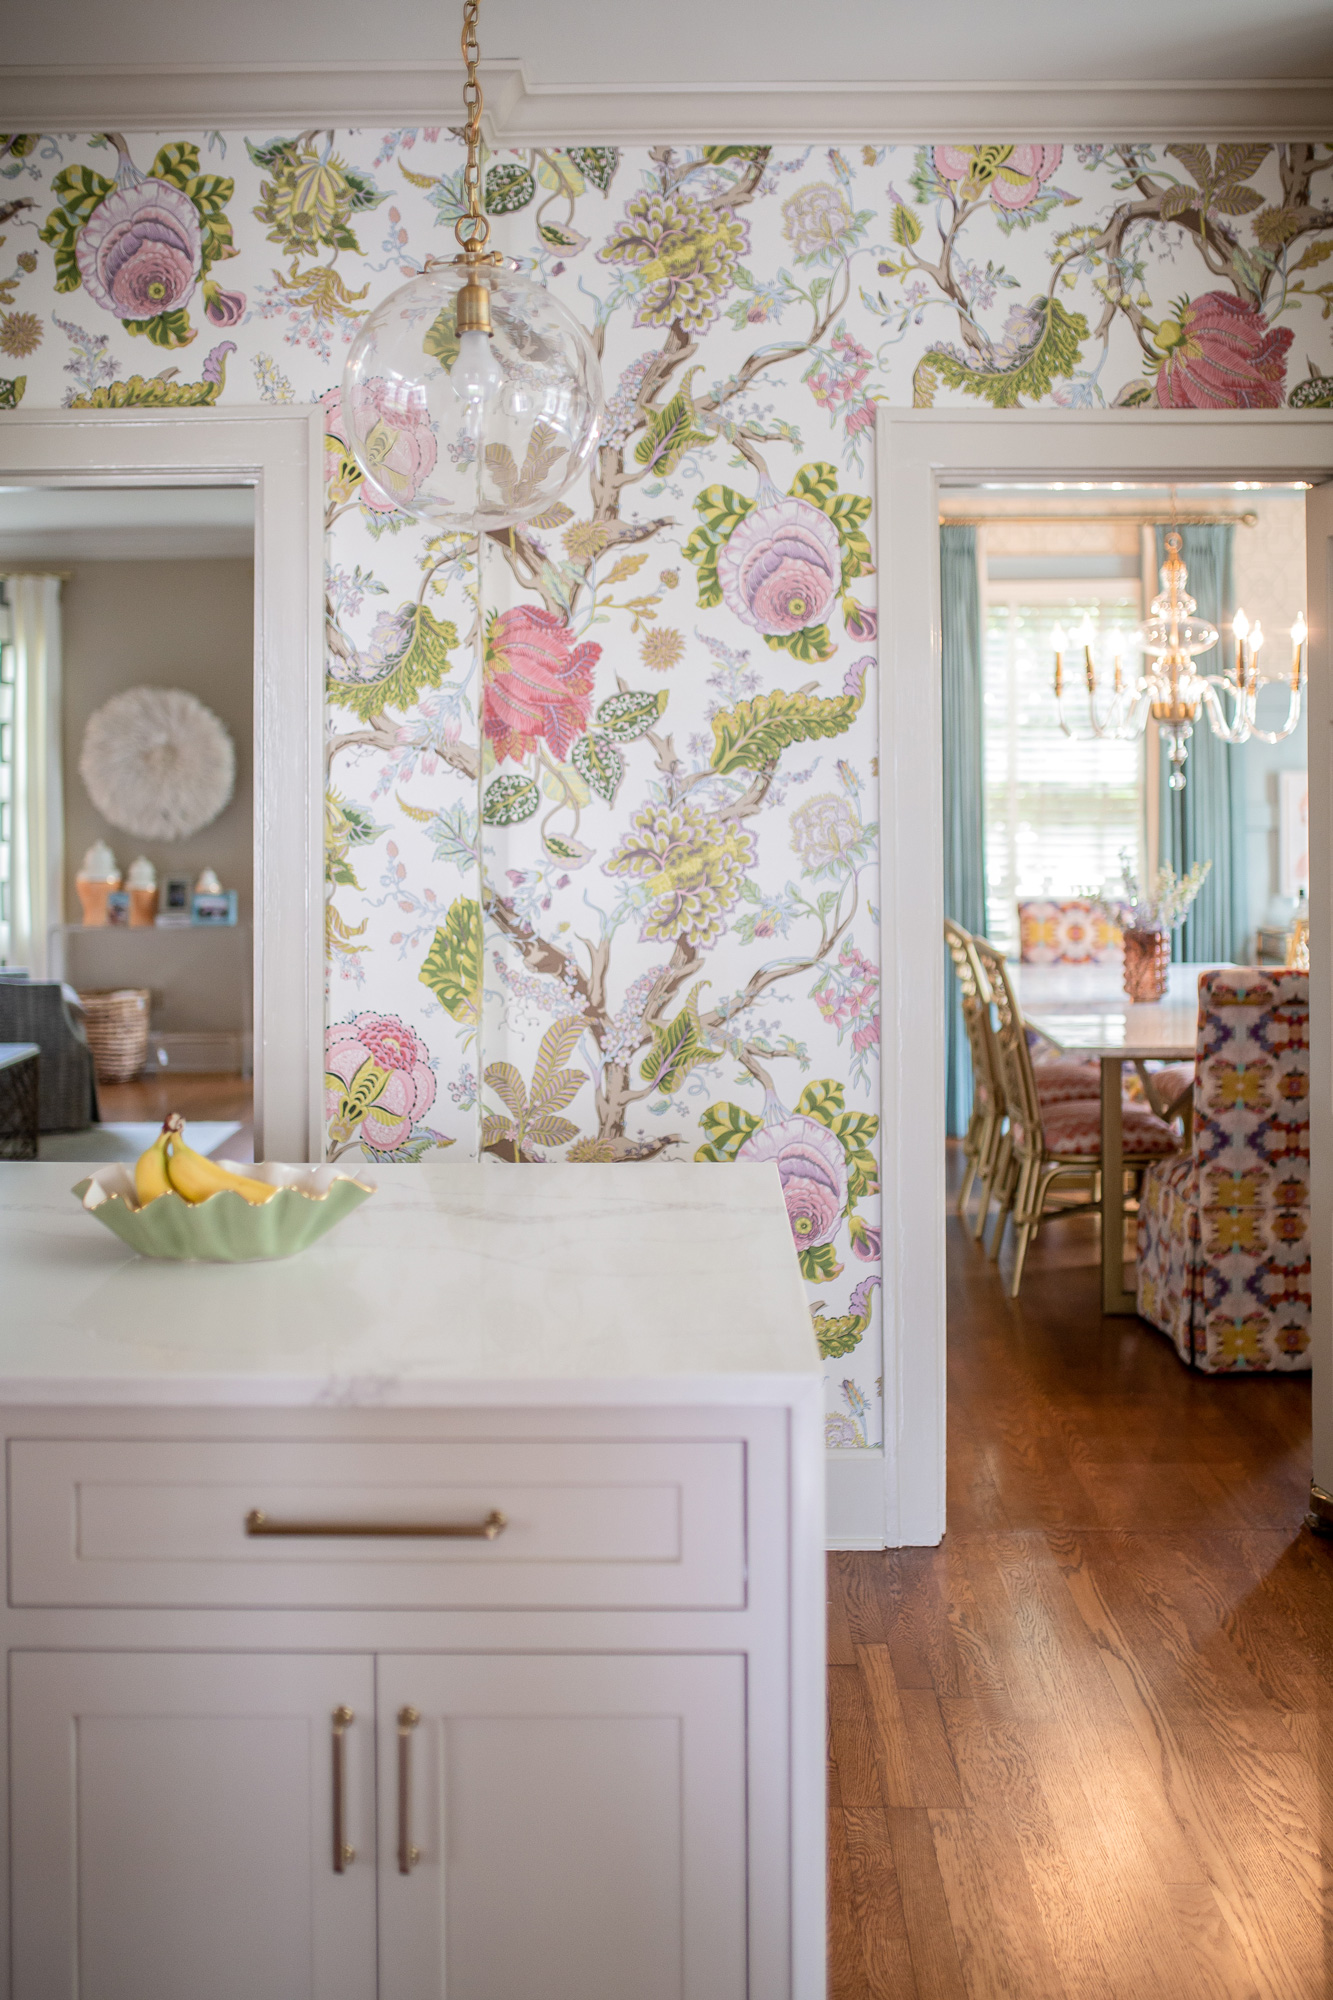 Our Southern Transitional Kitchen Design - Glitter & Gingham